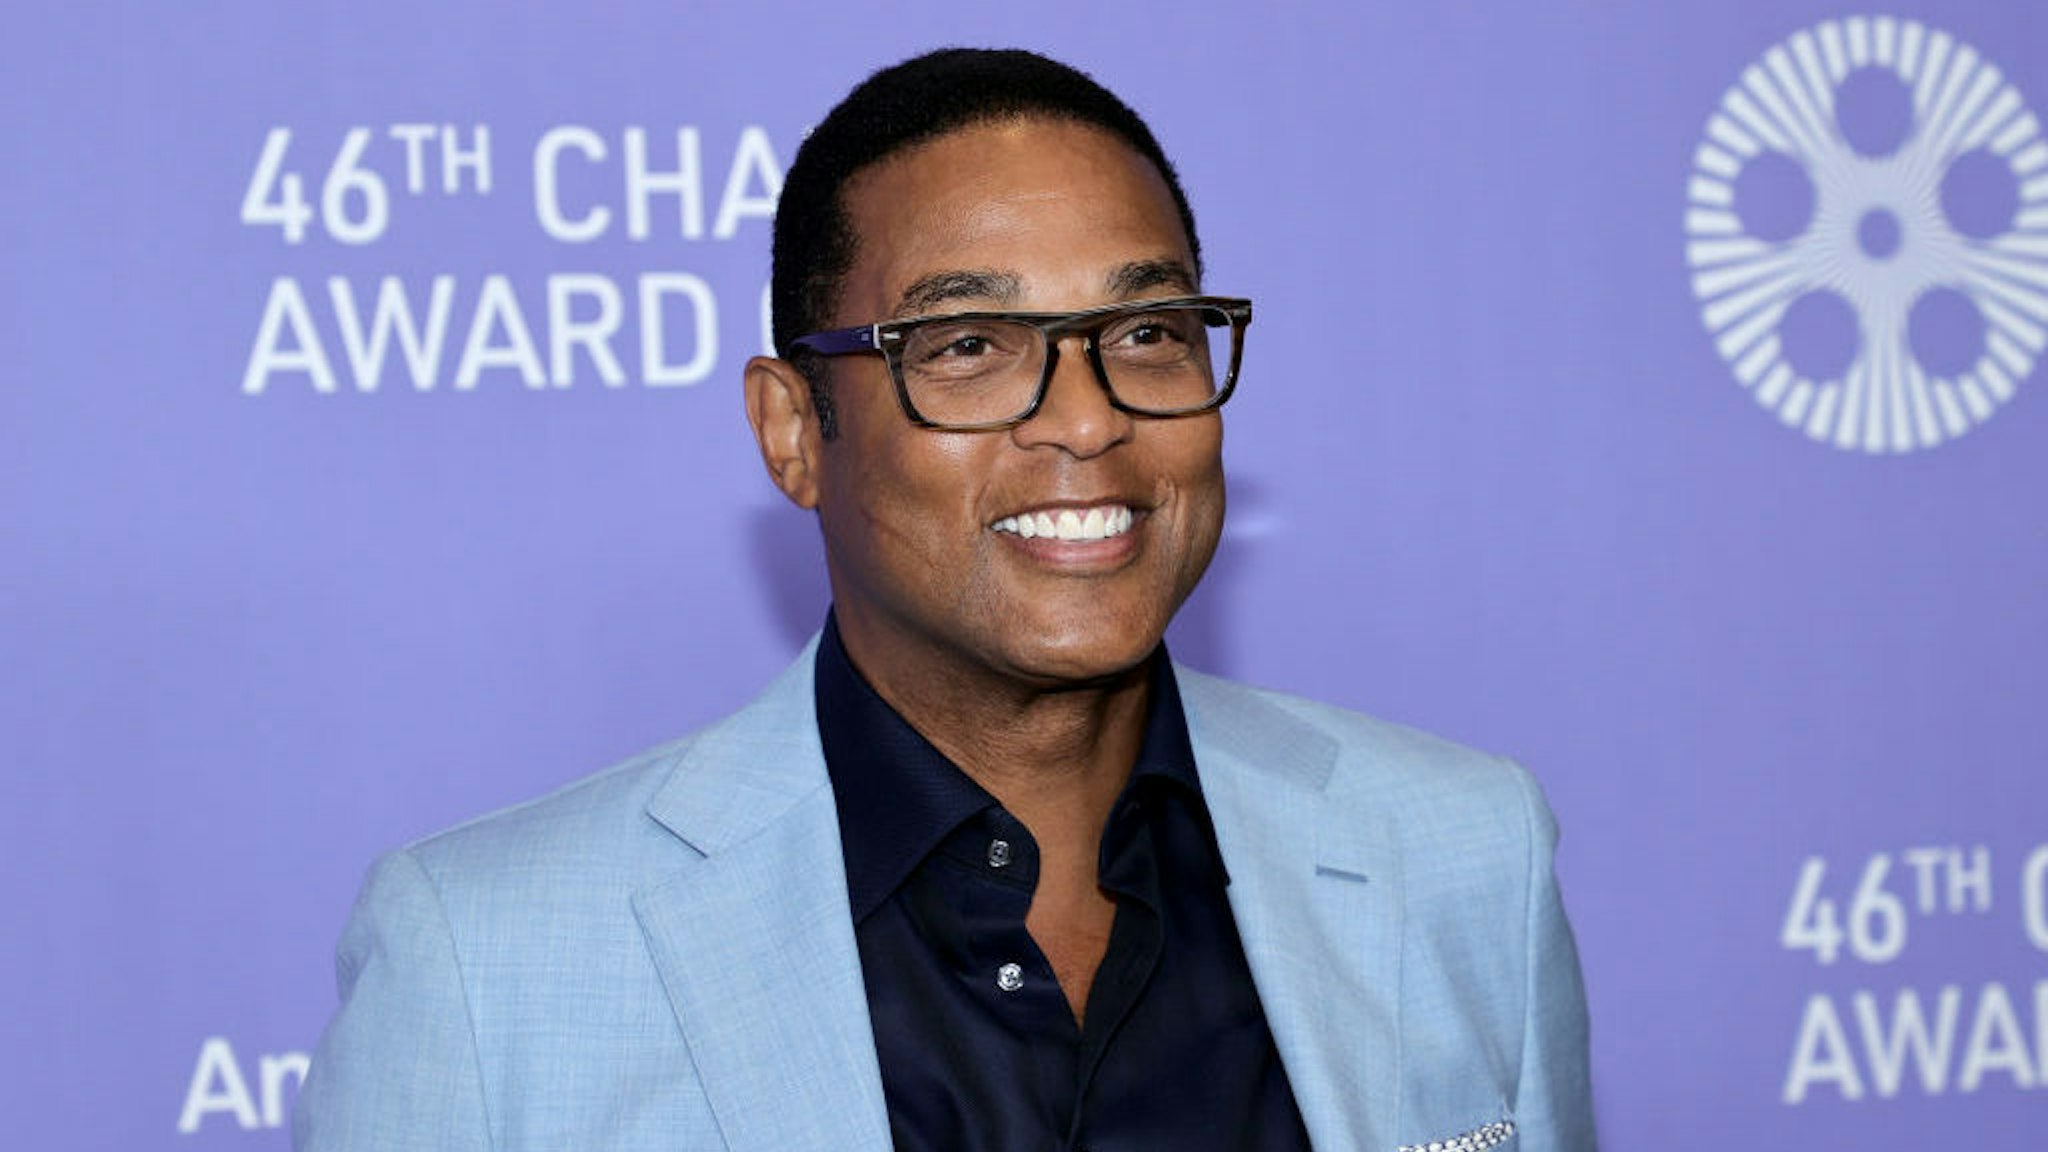 NEW YORK, NEW YORK - SEPTEMBER 09: Don Lemon attends the 46th Chaplin Award Gala Honoring Spike Lee on September 09, 2021 in New York City. (Photo by Jamie McCarthy/Getty Images)